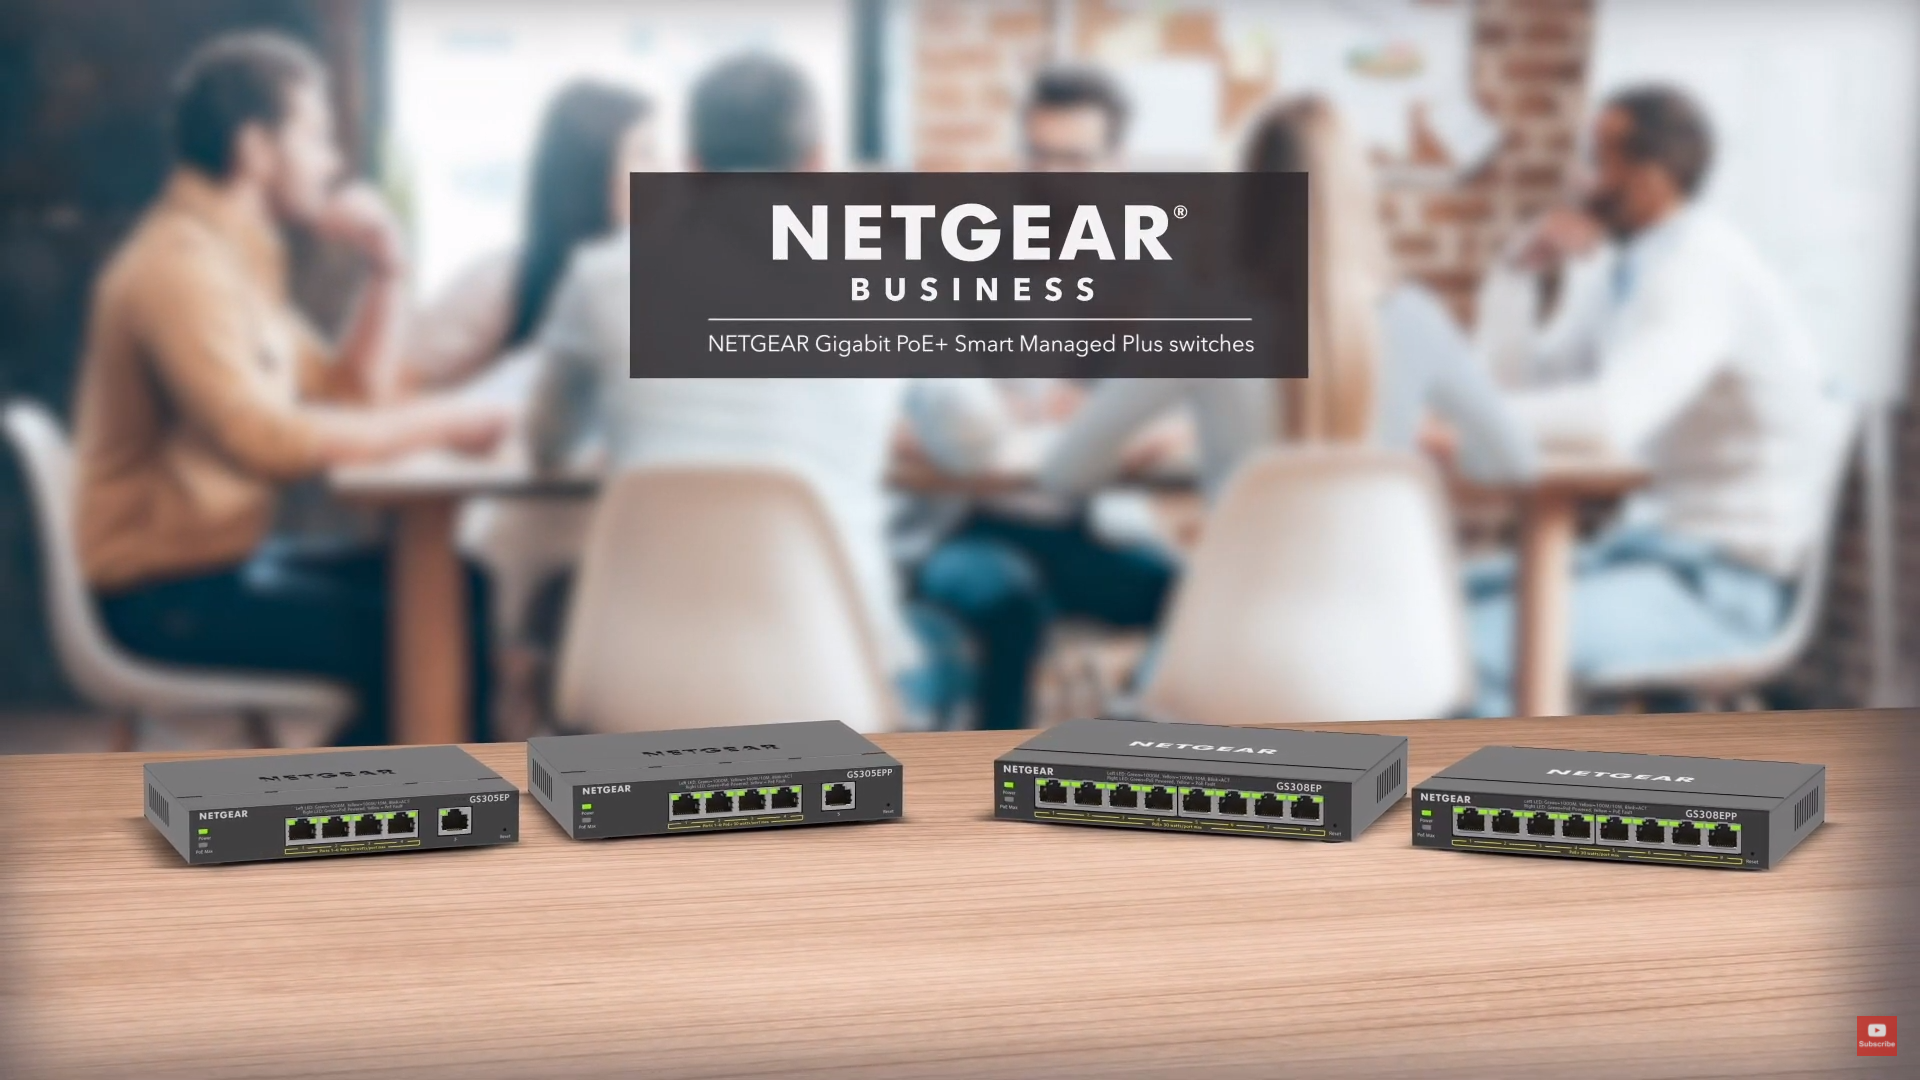 Compact and Plus Switches with PoE+ GS305EP GS305E... - NETGEAR Communities